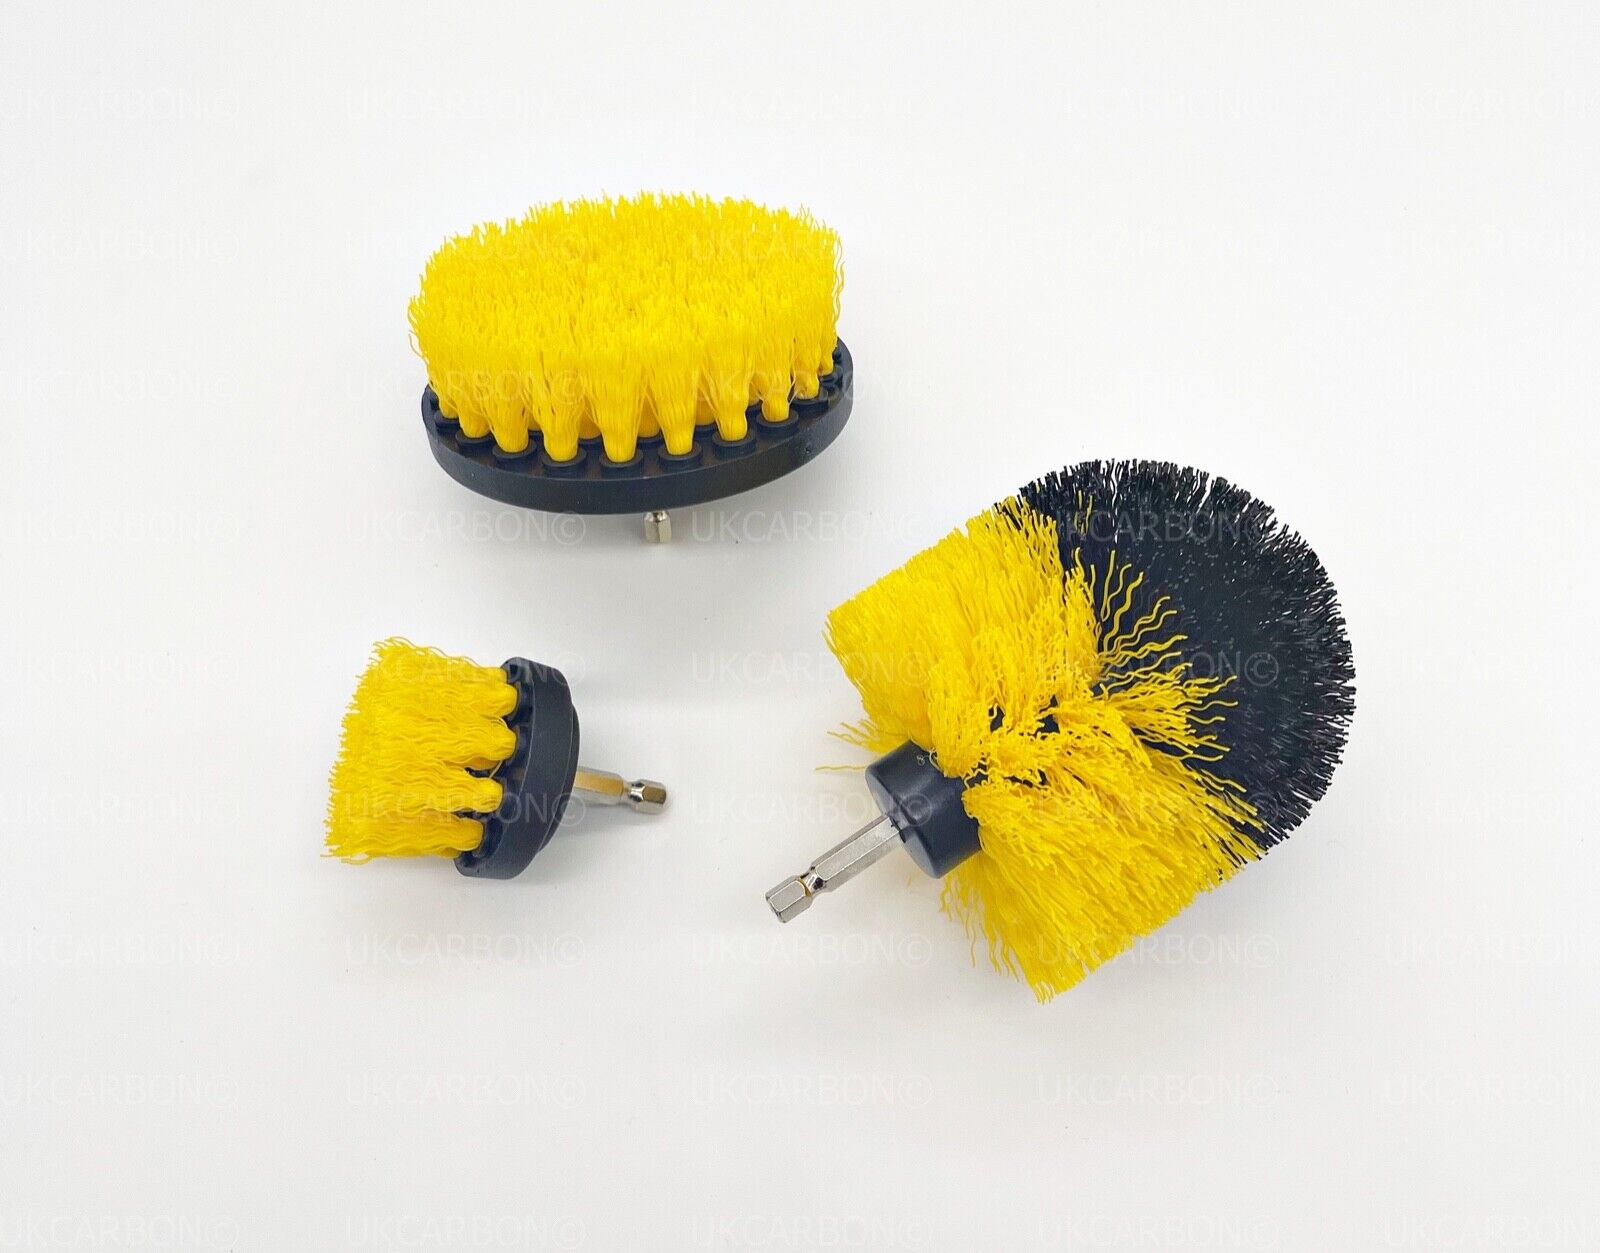 3x DRILL ATTACHMENT CLEANING BRUSH SET POWER SCRUB HOME CAR TILE BATHROOM YELLOW - UKCarbon